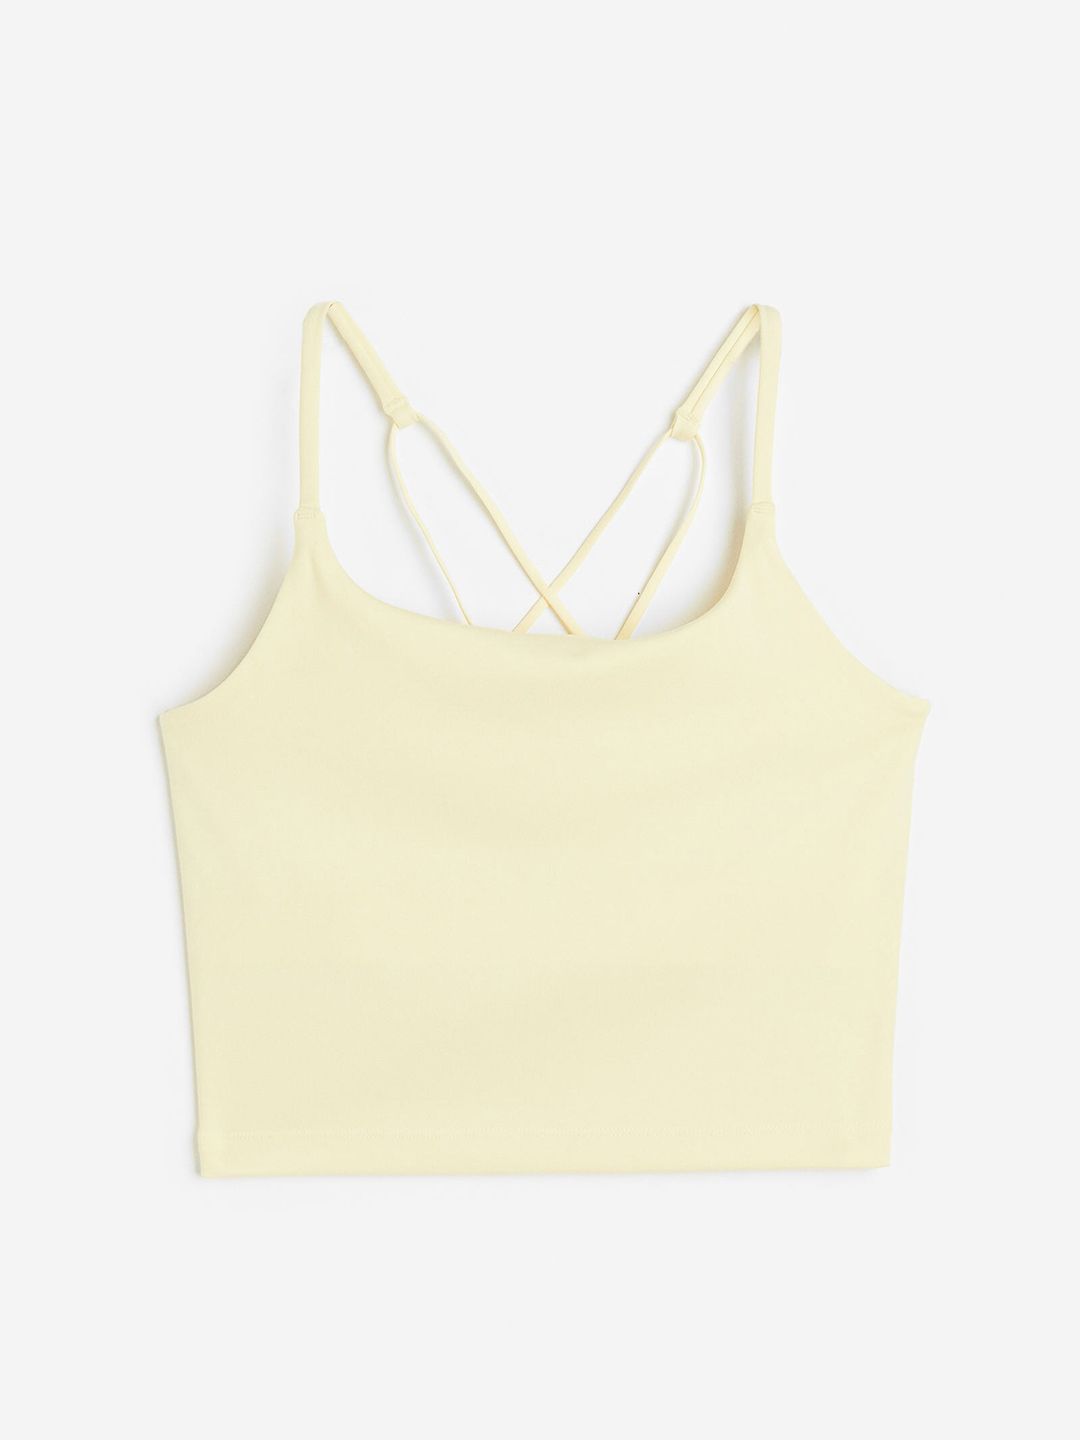 H&M Women DryMove Cropped Sports Vest Top Price in India